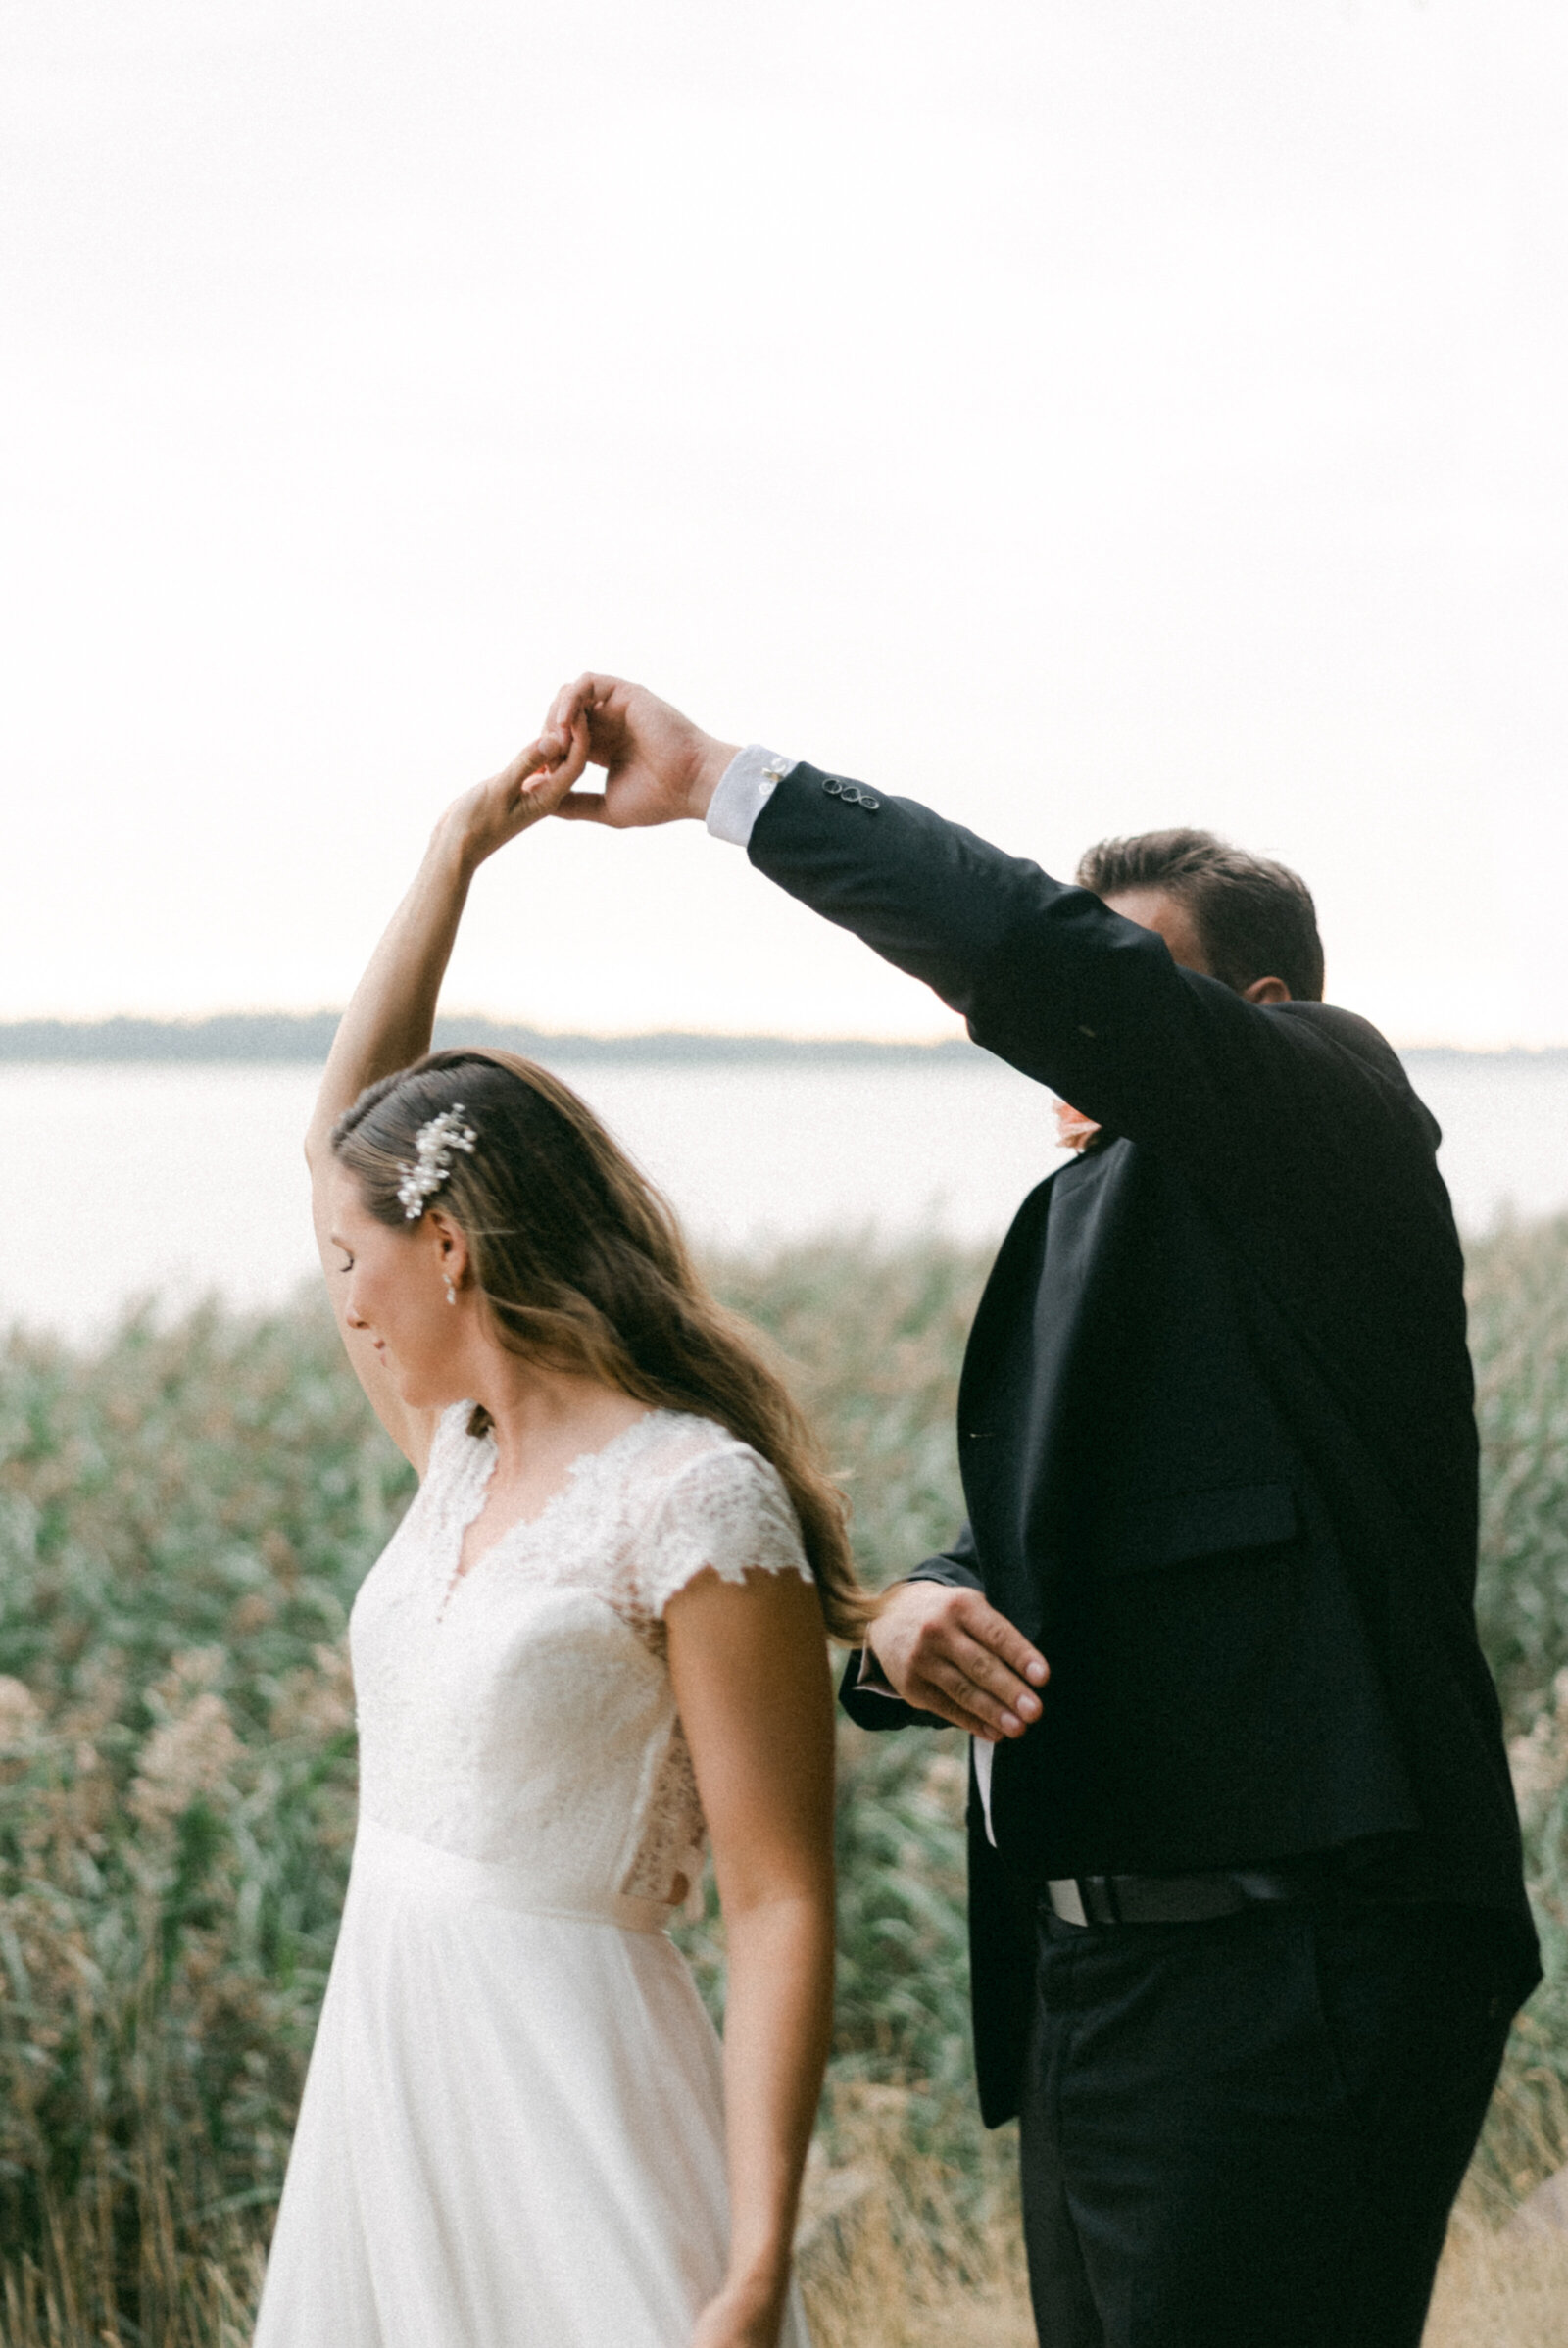 A wedding couple dancing by the sea in Helsinki during their wedding photography with elopement photographer Hannika Gabrielsson.